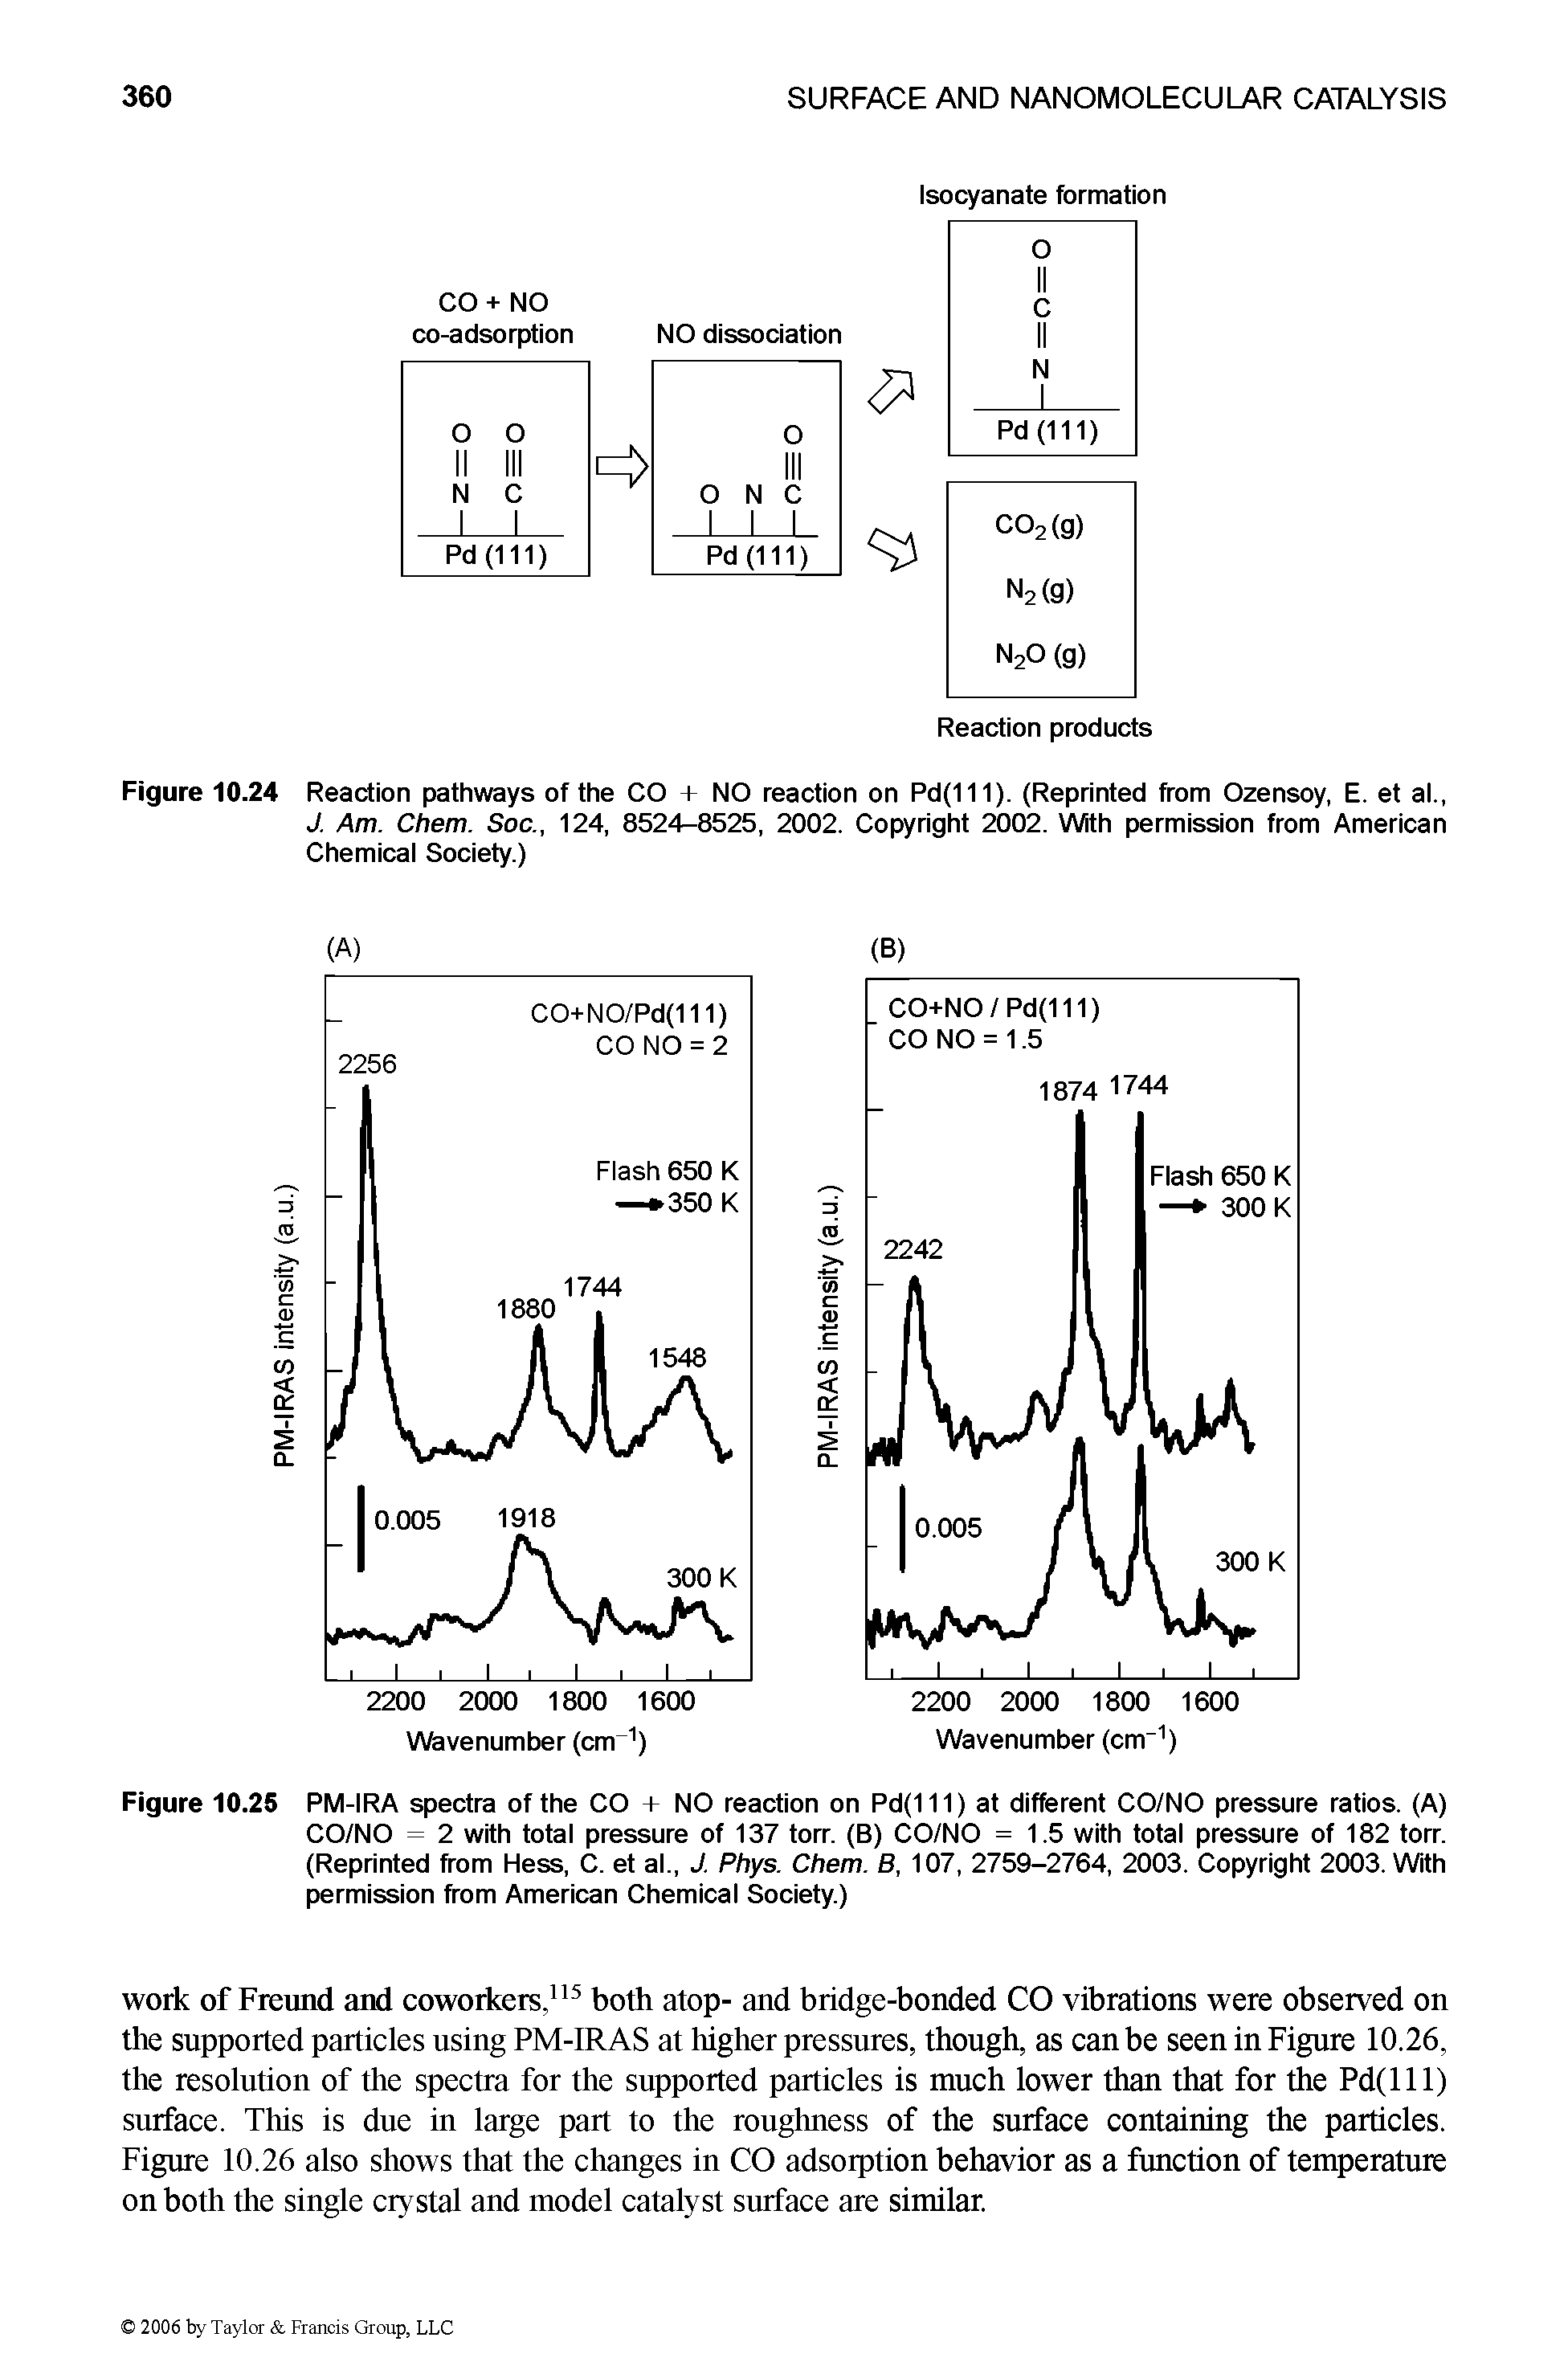 Figure 10.25 PM-IRA spectra of the CO + NO reaction on Pd(111) at different CO/NO pressure ratios. (A) CO/NO = 2 with total pressure of 137 torr. (B) CO/NO = 1.5 with total pressure of 182 torr. (Reprinted from Hess, C. et al., J. Phys. Chem. B, 107, 2759-2764, 2003. Copyright 2003. With permission from American Chemical Society.)...